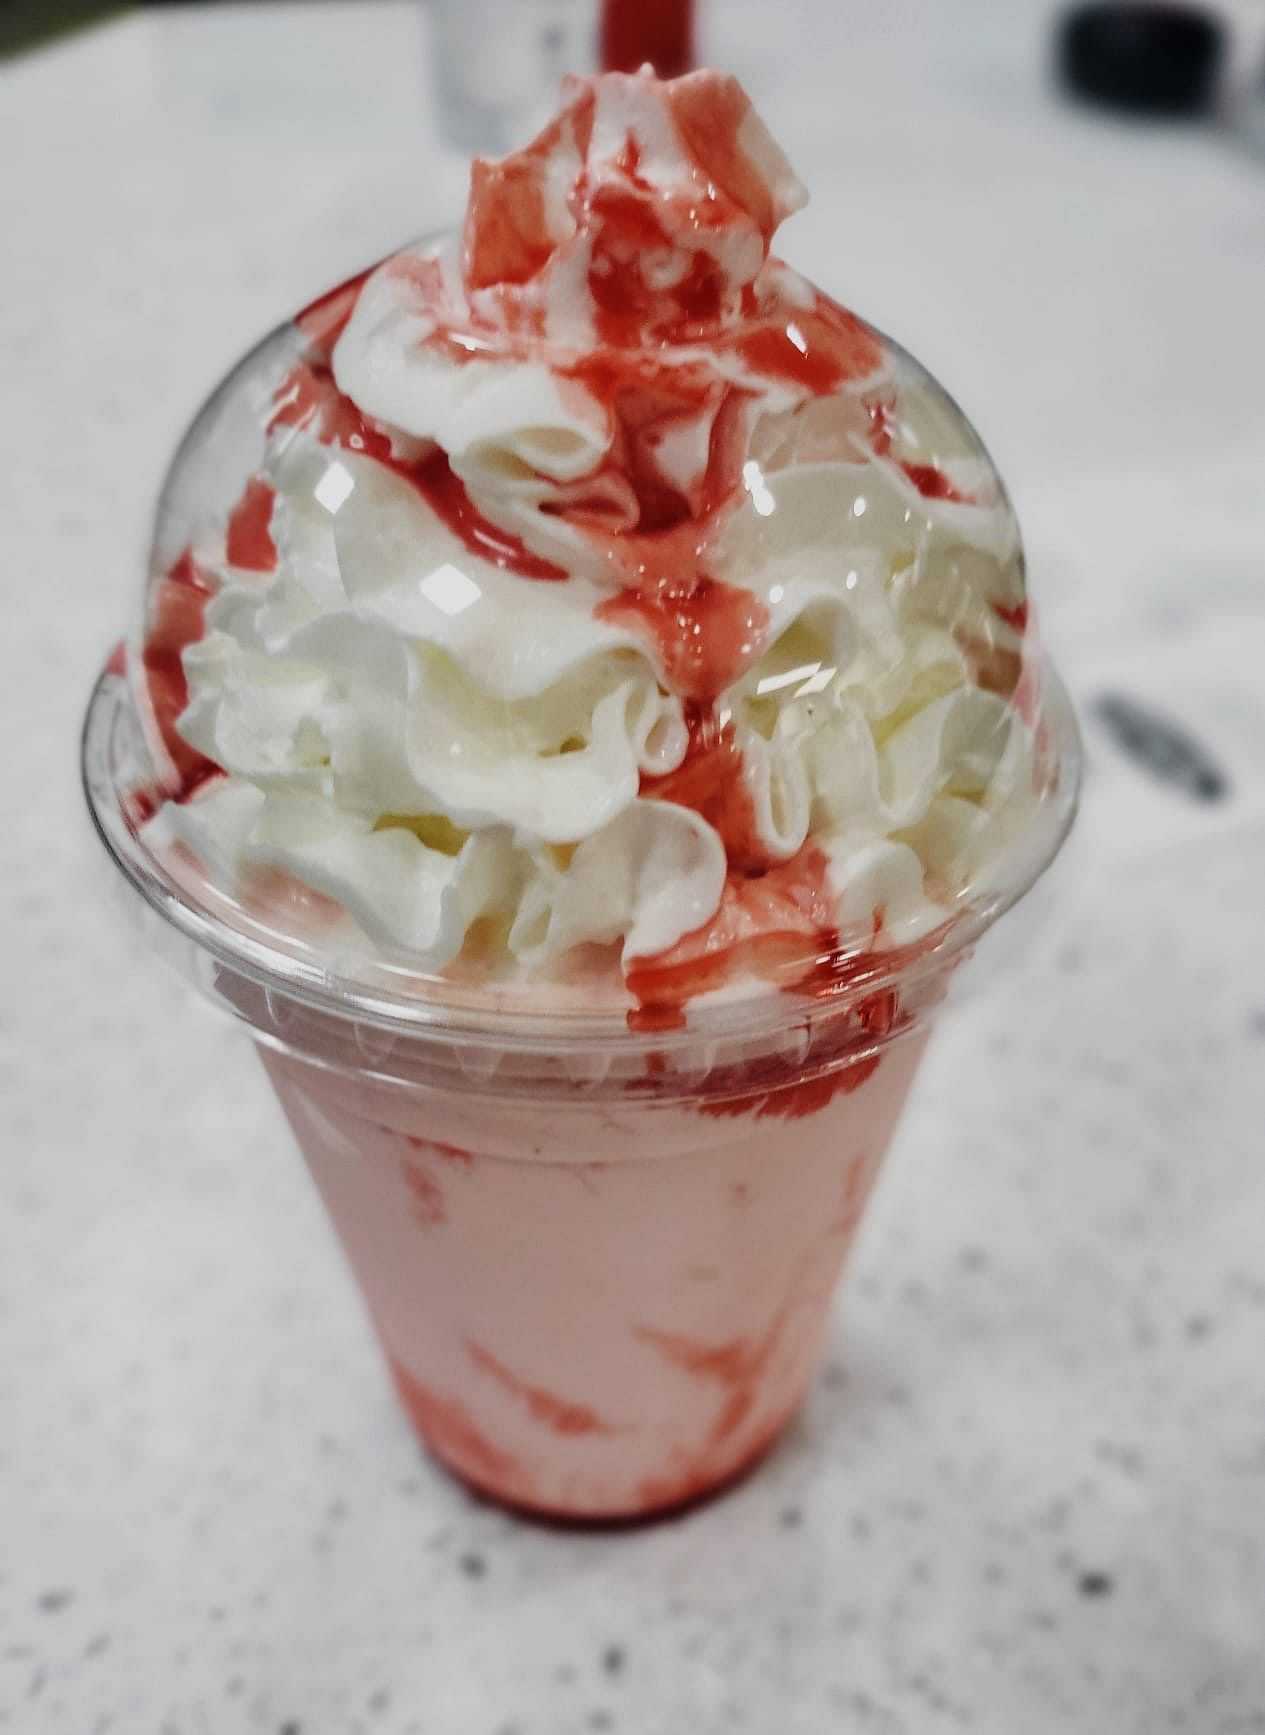 Strawberry milkshake topped with whipped cream and strawberry syrup in a clear plastic cup.